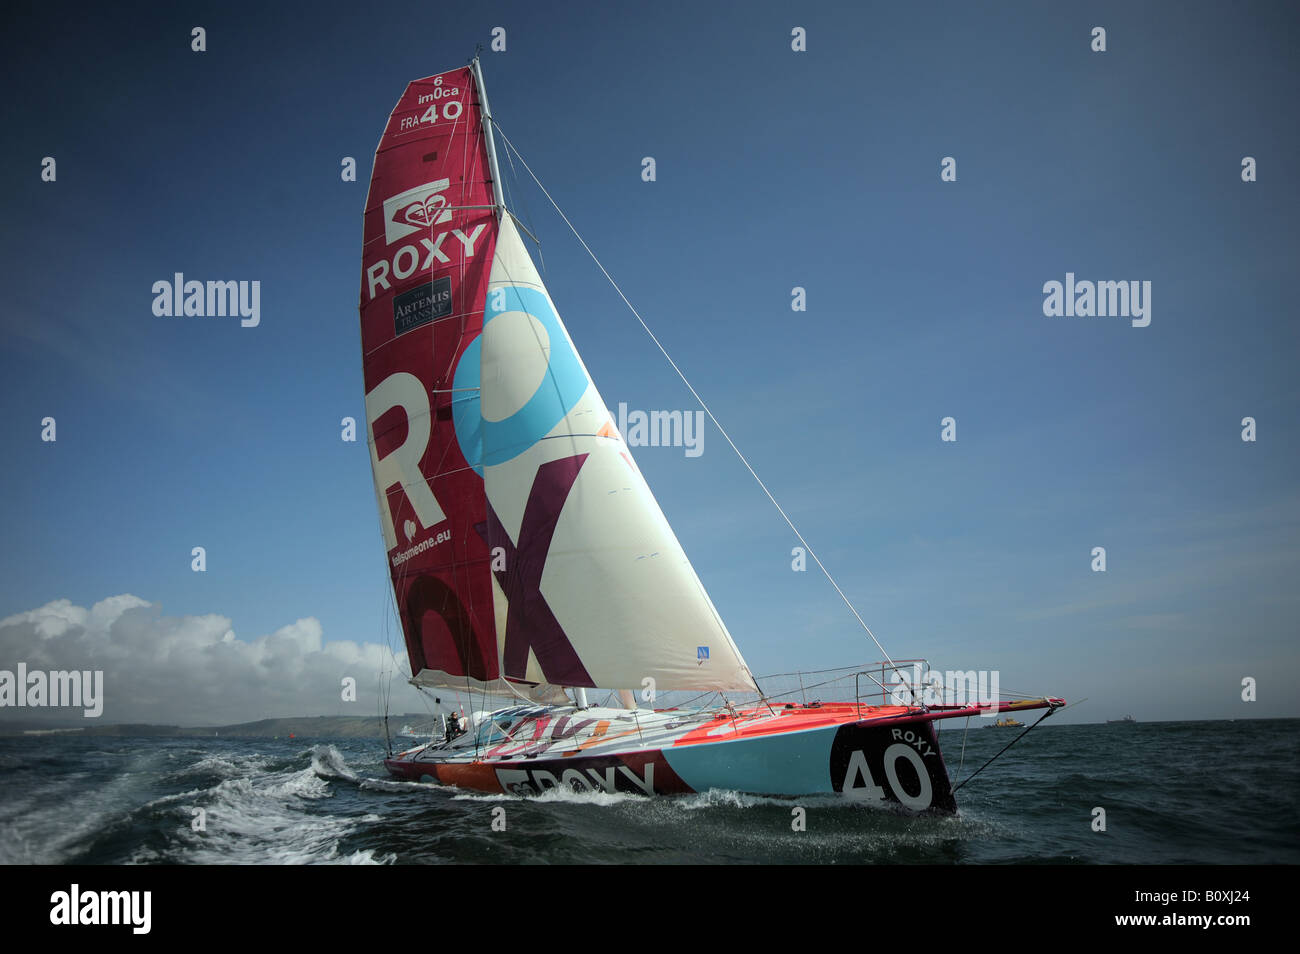 Sam davies sailing the Quiksilver Roxy boat in the Artemis Transit race in Plymouth, Devon, UK. Stock Photo